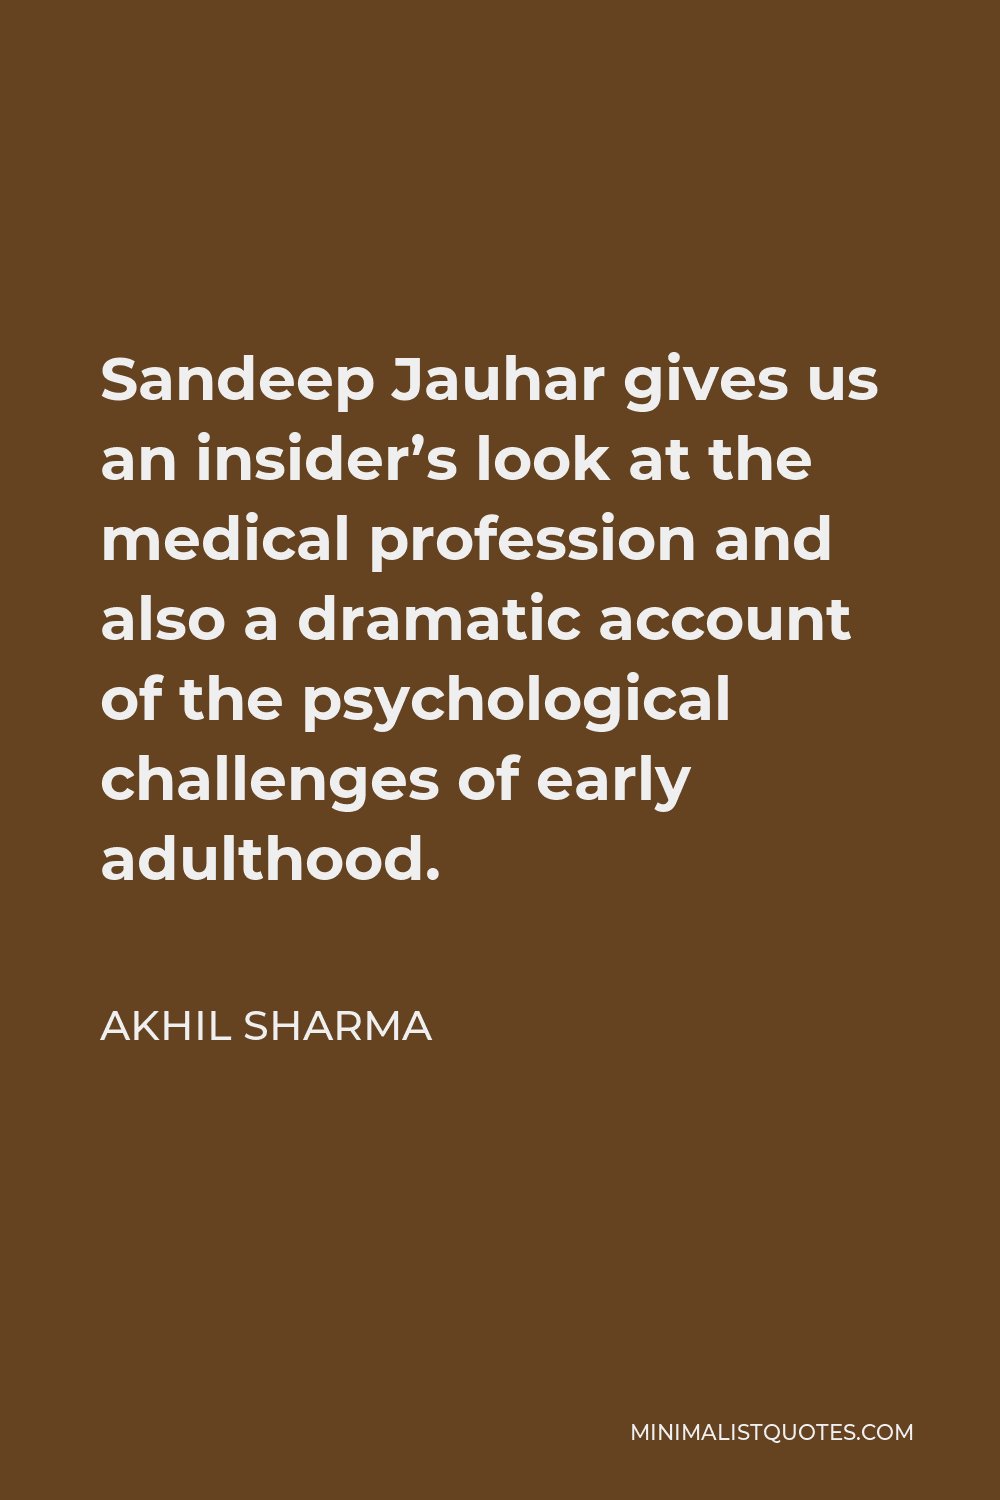 Akhil Sharma Quote - Sandeep Jauhar gives us an insider’s look at the medical profession and also a dramatic account of the psychological challenges of early adulthood.